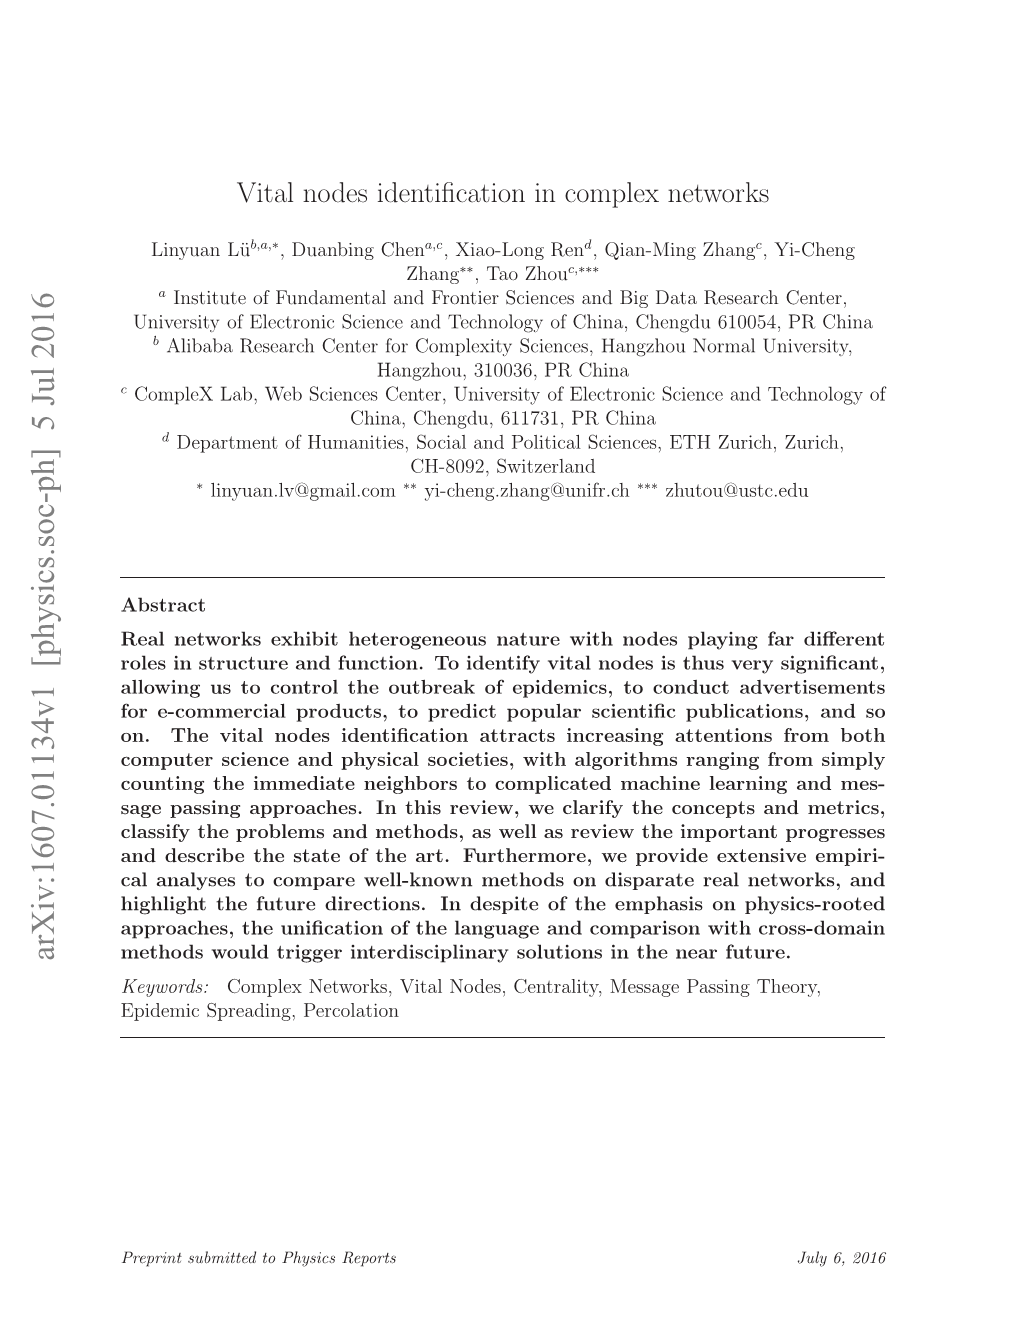 Vital Nodes Identification in Complex Networks